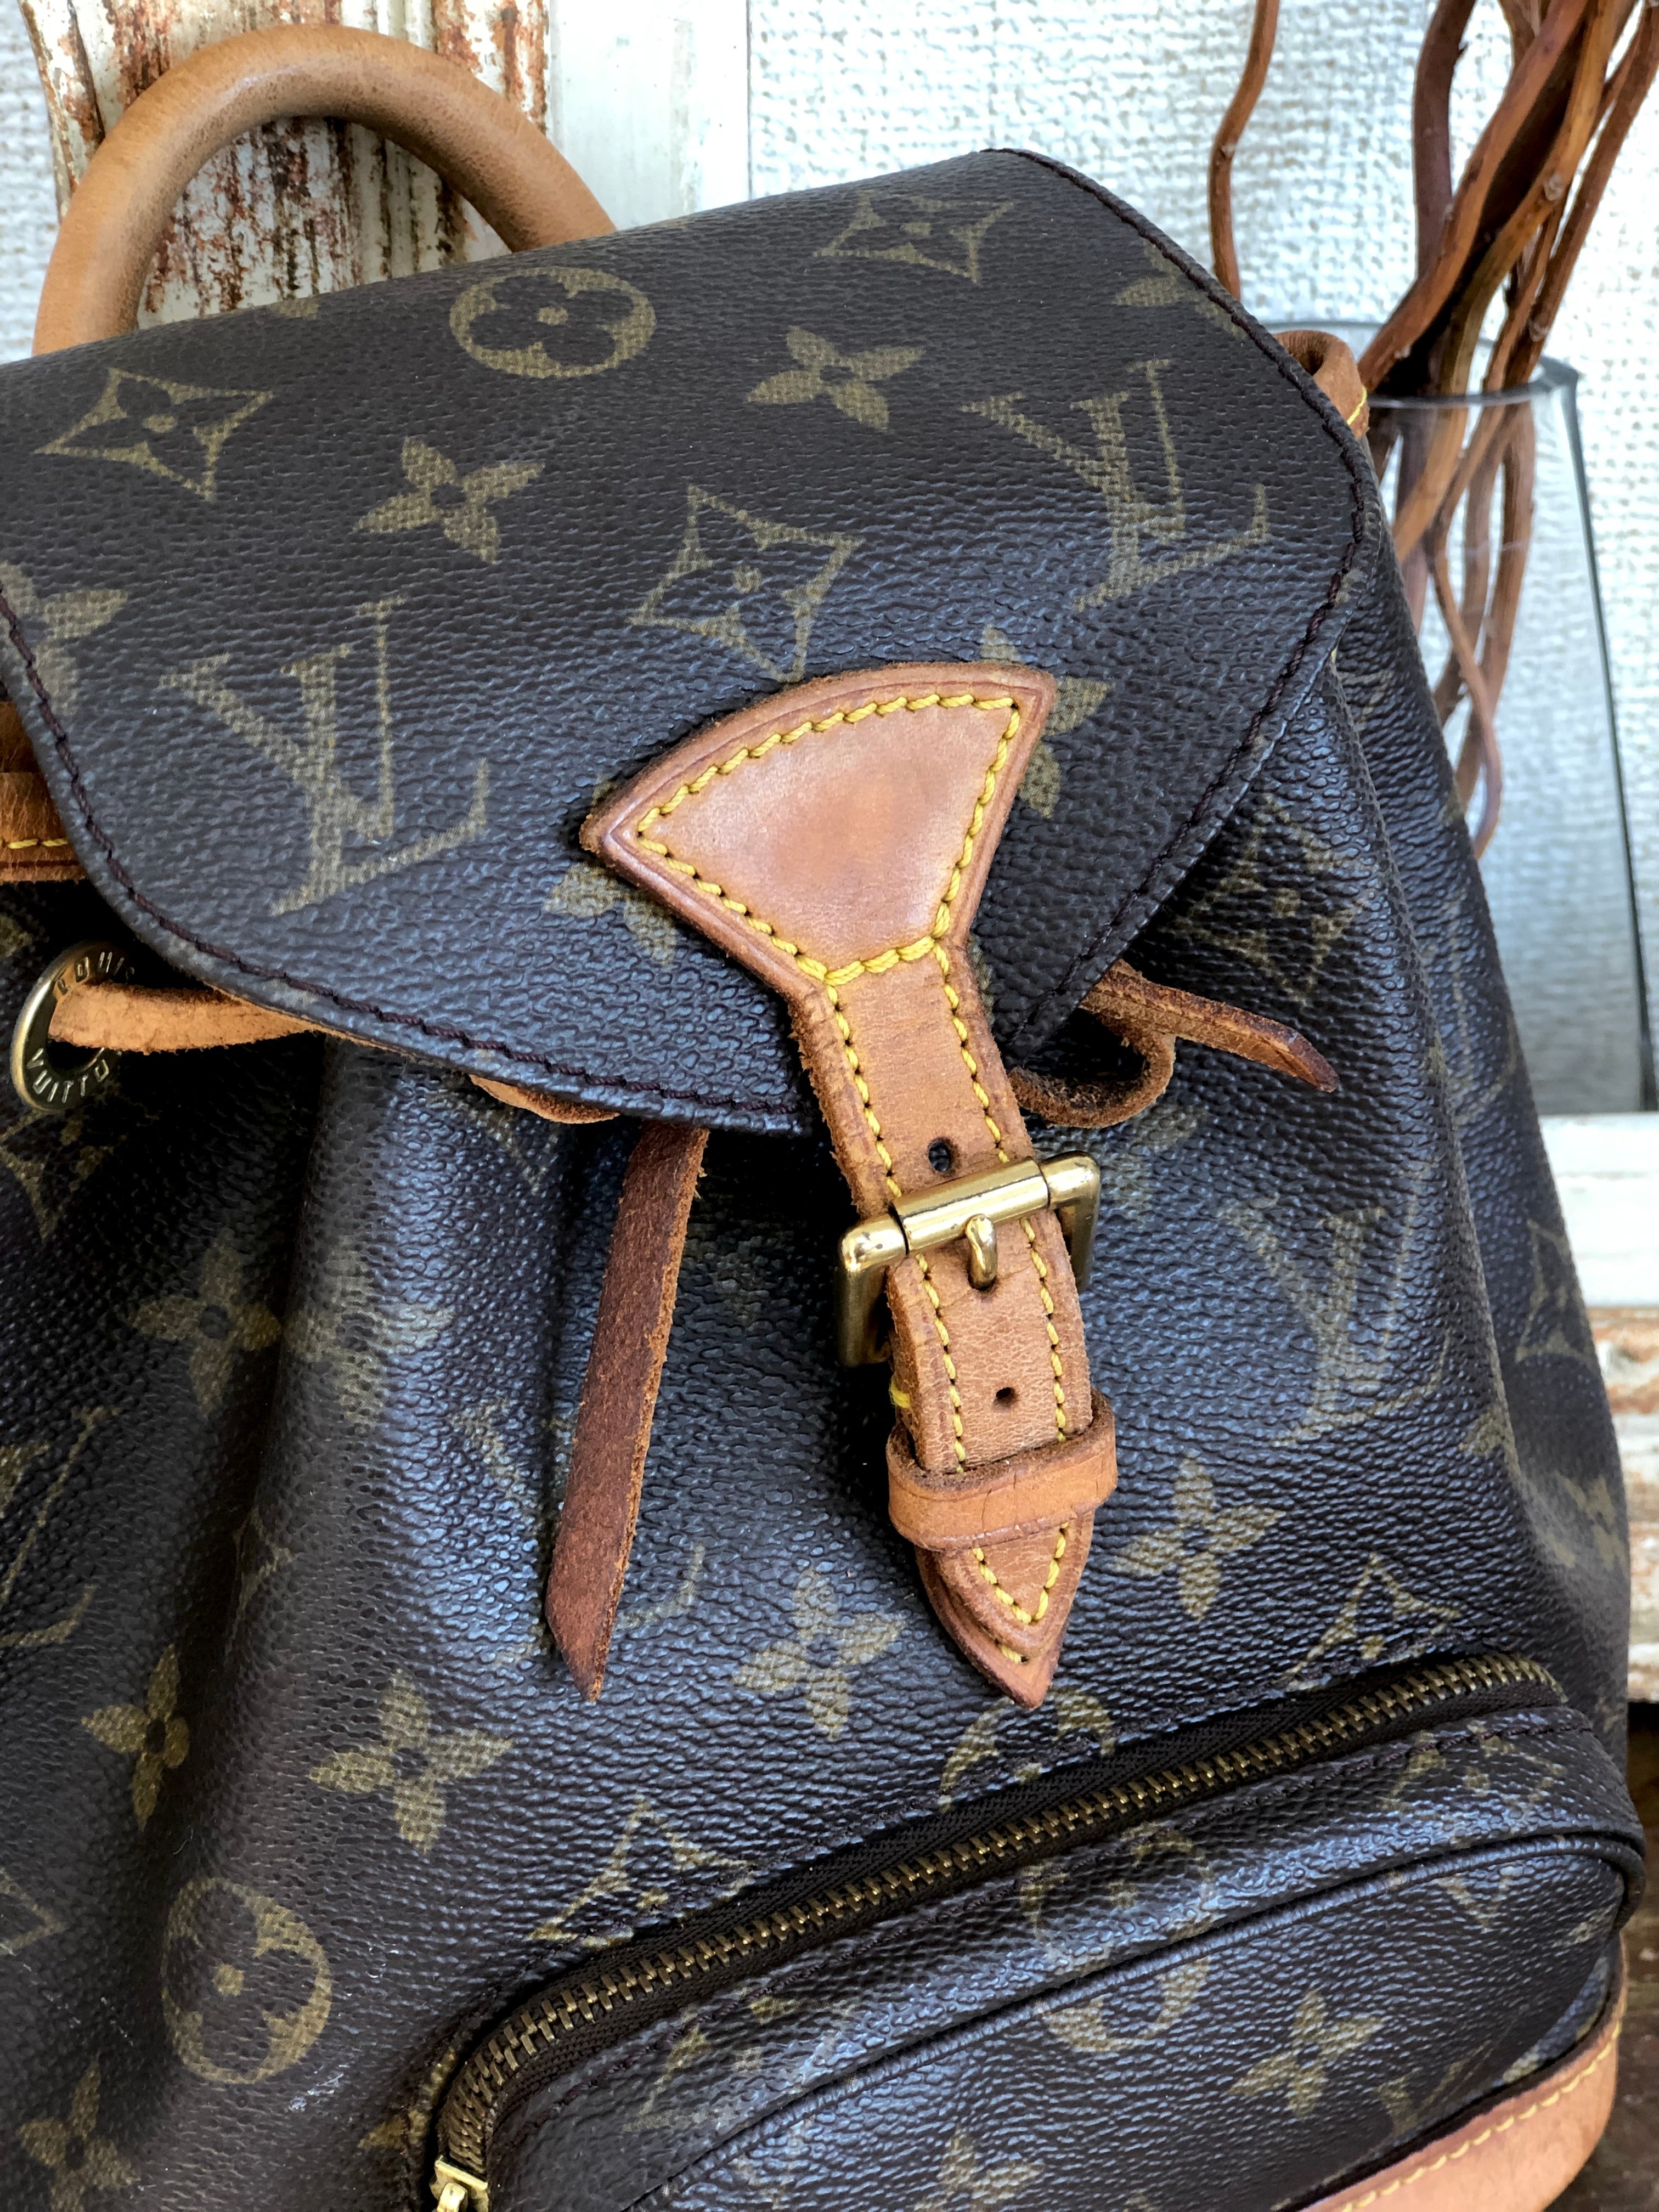 LOUIS VUITTON 　ルイ ヴィトン　モノグラム　モンスリ　ミニ　M51137　リュック　バックパック　ブラウン　vintage　ヴィンテージ　 ncci75 | VintageShop solo powered by BASE